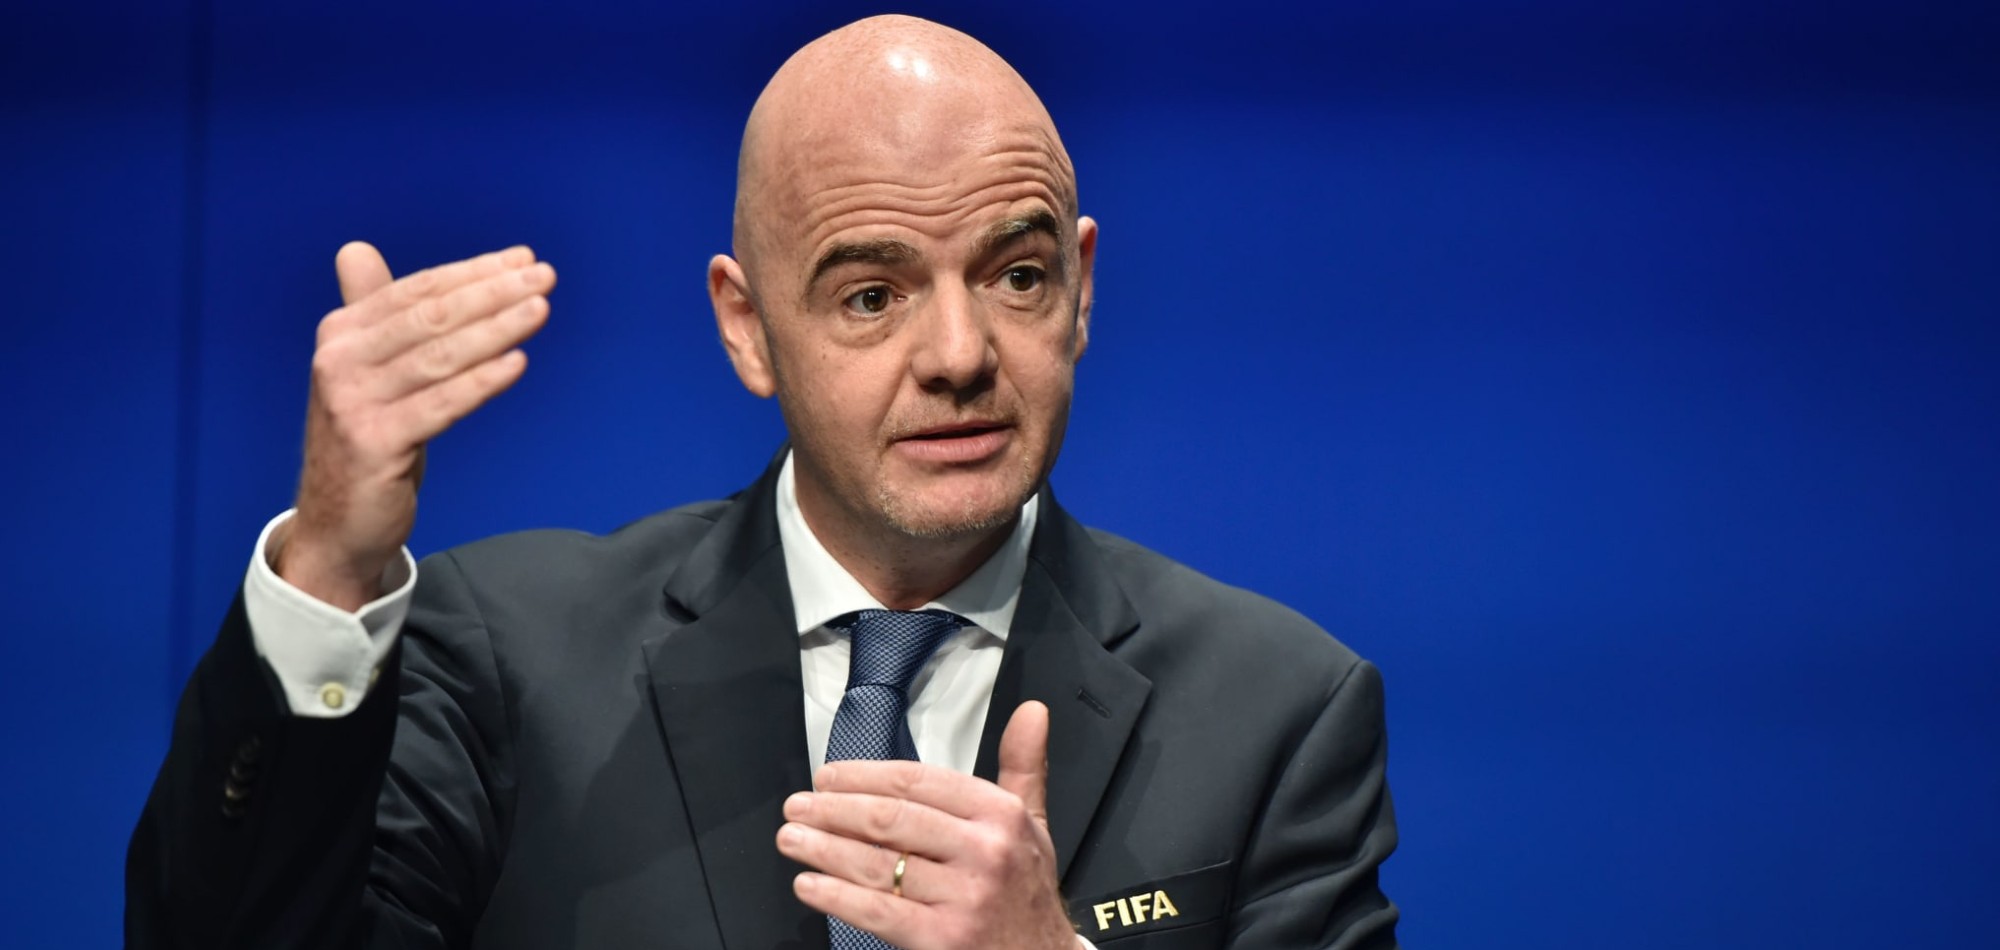 FIFA President Gianni Infantino Commits To Club World Cup, Suggests Women’s World Cup Every Two Years